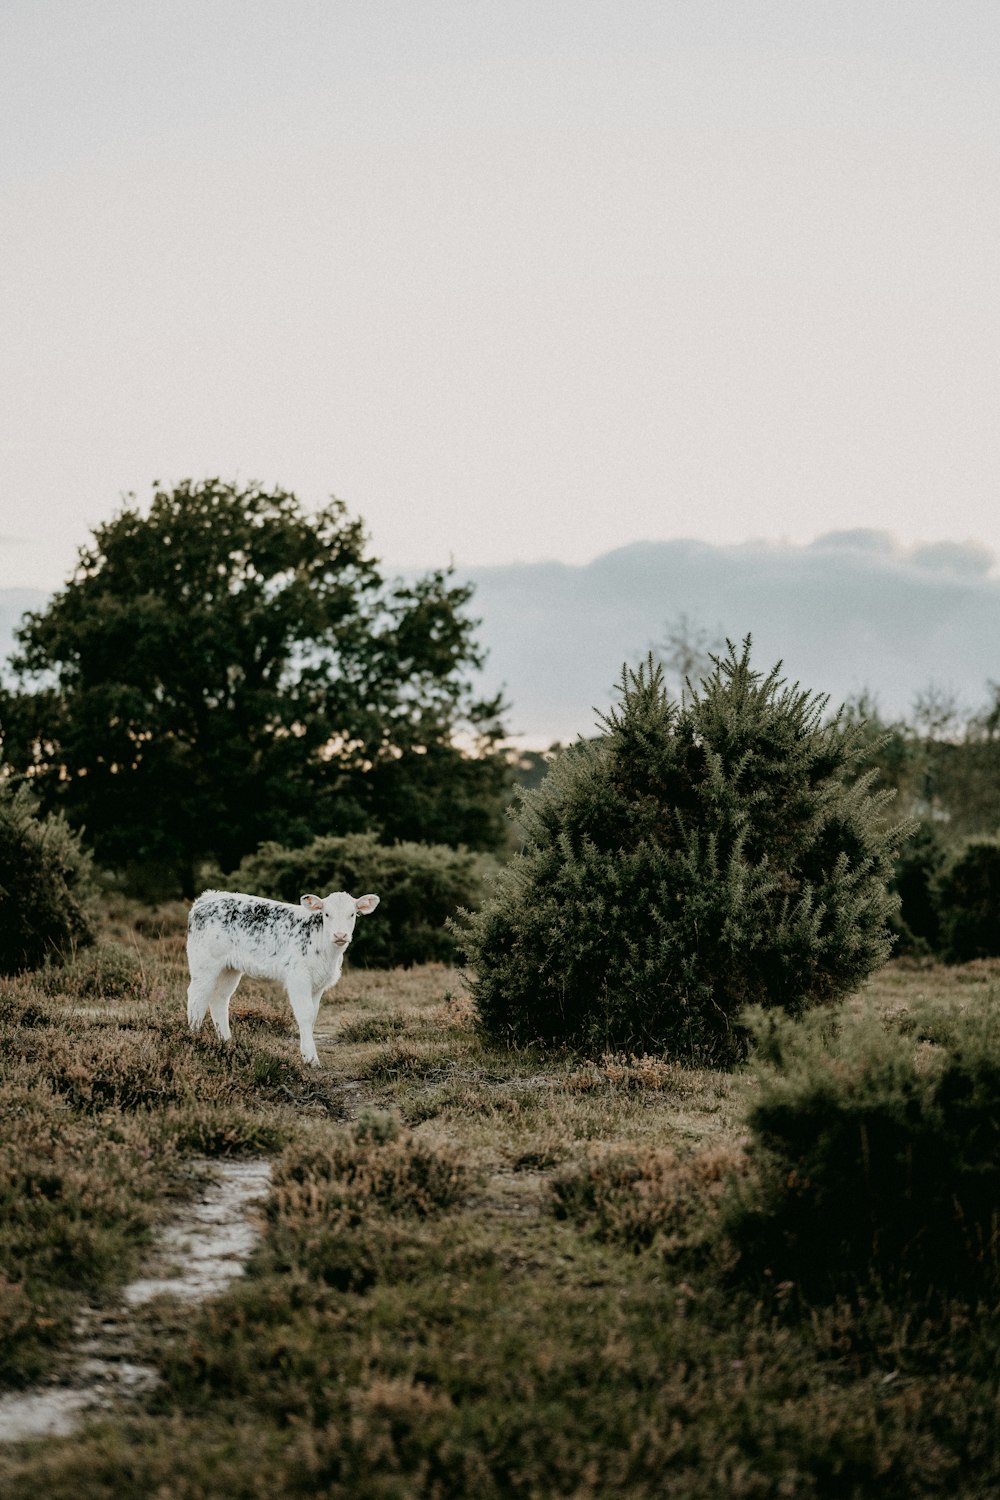 a cow standing in a field with trees in the background